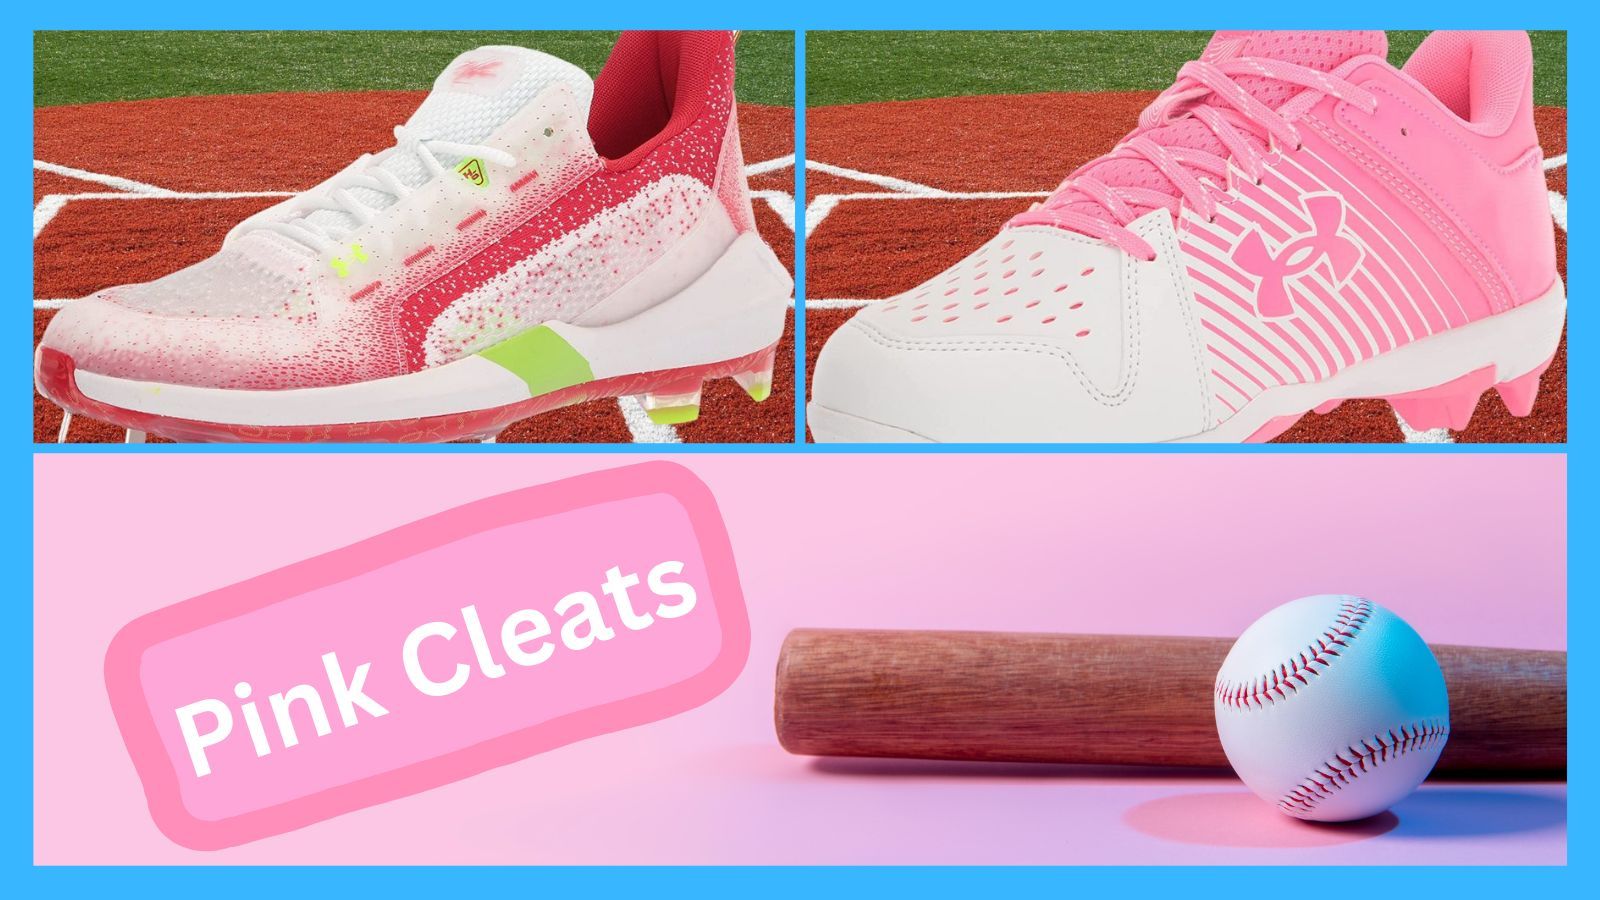 Blisters be Gone with These 6 Wide Baseball Cleats!